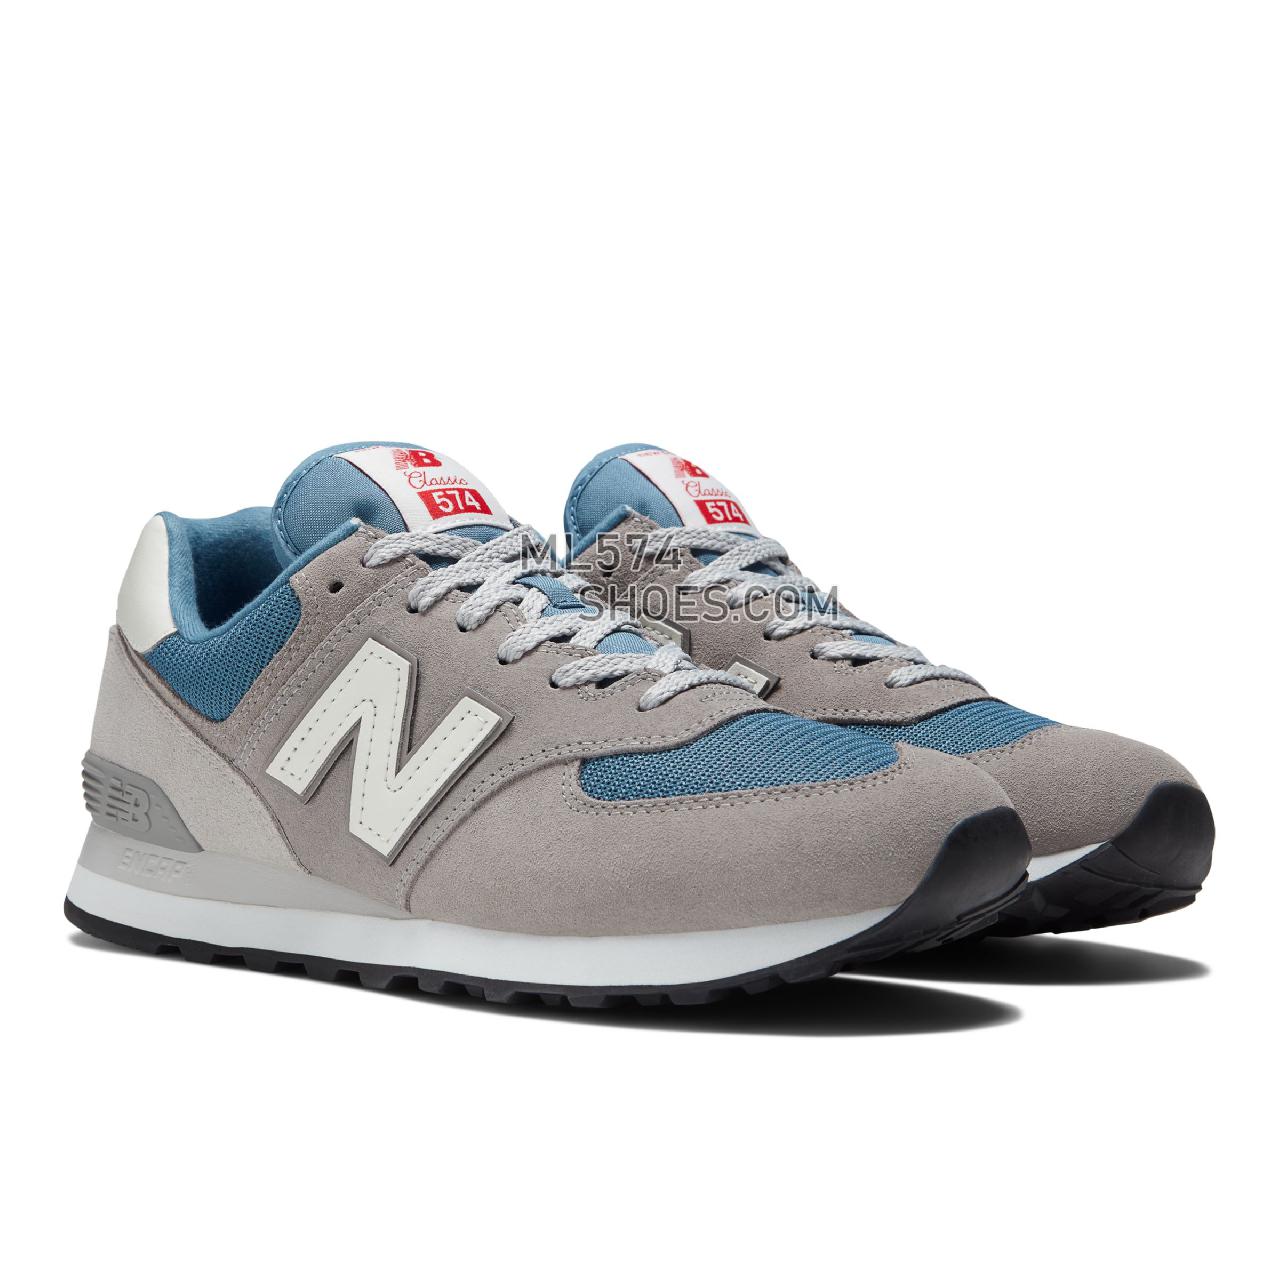 New Balance 574v2 - Unisex Men's Women's Classic Sneakers - Grey with Blue - ML574OW2